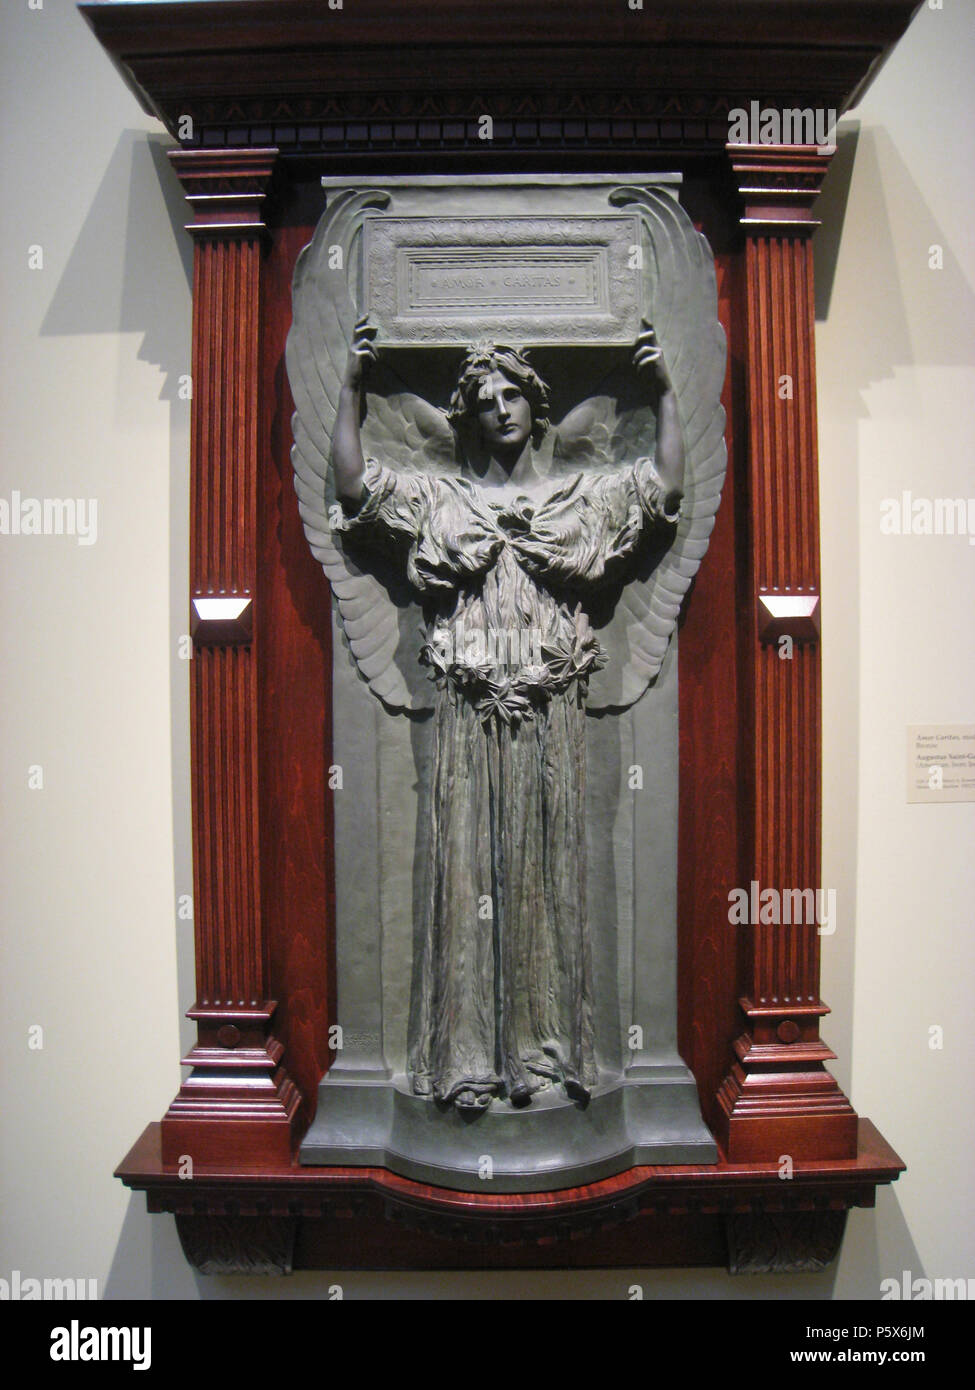 N/A. English: Amor Caritas, modeled 1898 by sculptor Augustus Saint-Gaudens (1848-1907), in the Cleveland Museum of Art, Cleveland, Ohio, USA. There was no prohibition against photography in the museum. I took this photograph. Sculpture modeled 1898; photograph taken in July 2008..   Augustus Saint-Gaudens  (1848–1907)     Alternative names Augustus Saint- Gaudens; st. gaudens  Description American sculptor  Date of birth/death 1 March 1848 3 August 1907  Location of birth/death Dublin New Hampshire  Authority control  : Q770625 VIAF:54944558 ISNI:0000 0000 8384 0339 ULAN:500124332 LCCN:n50030 Stock Photo